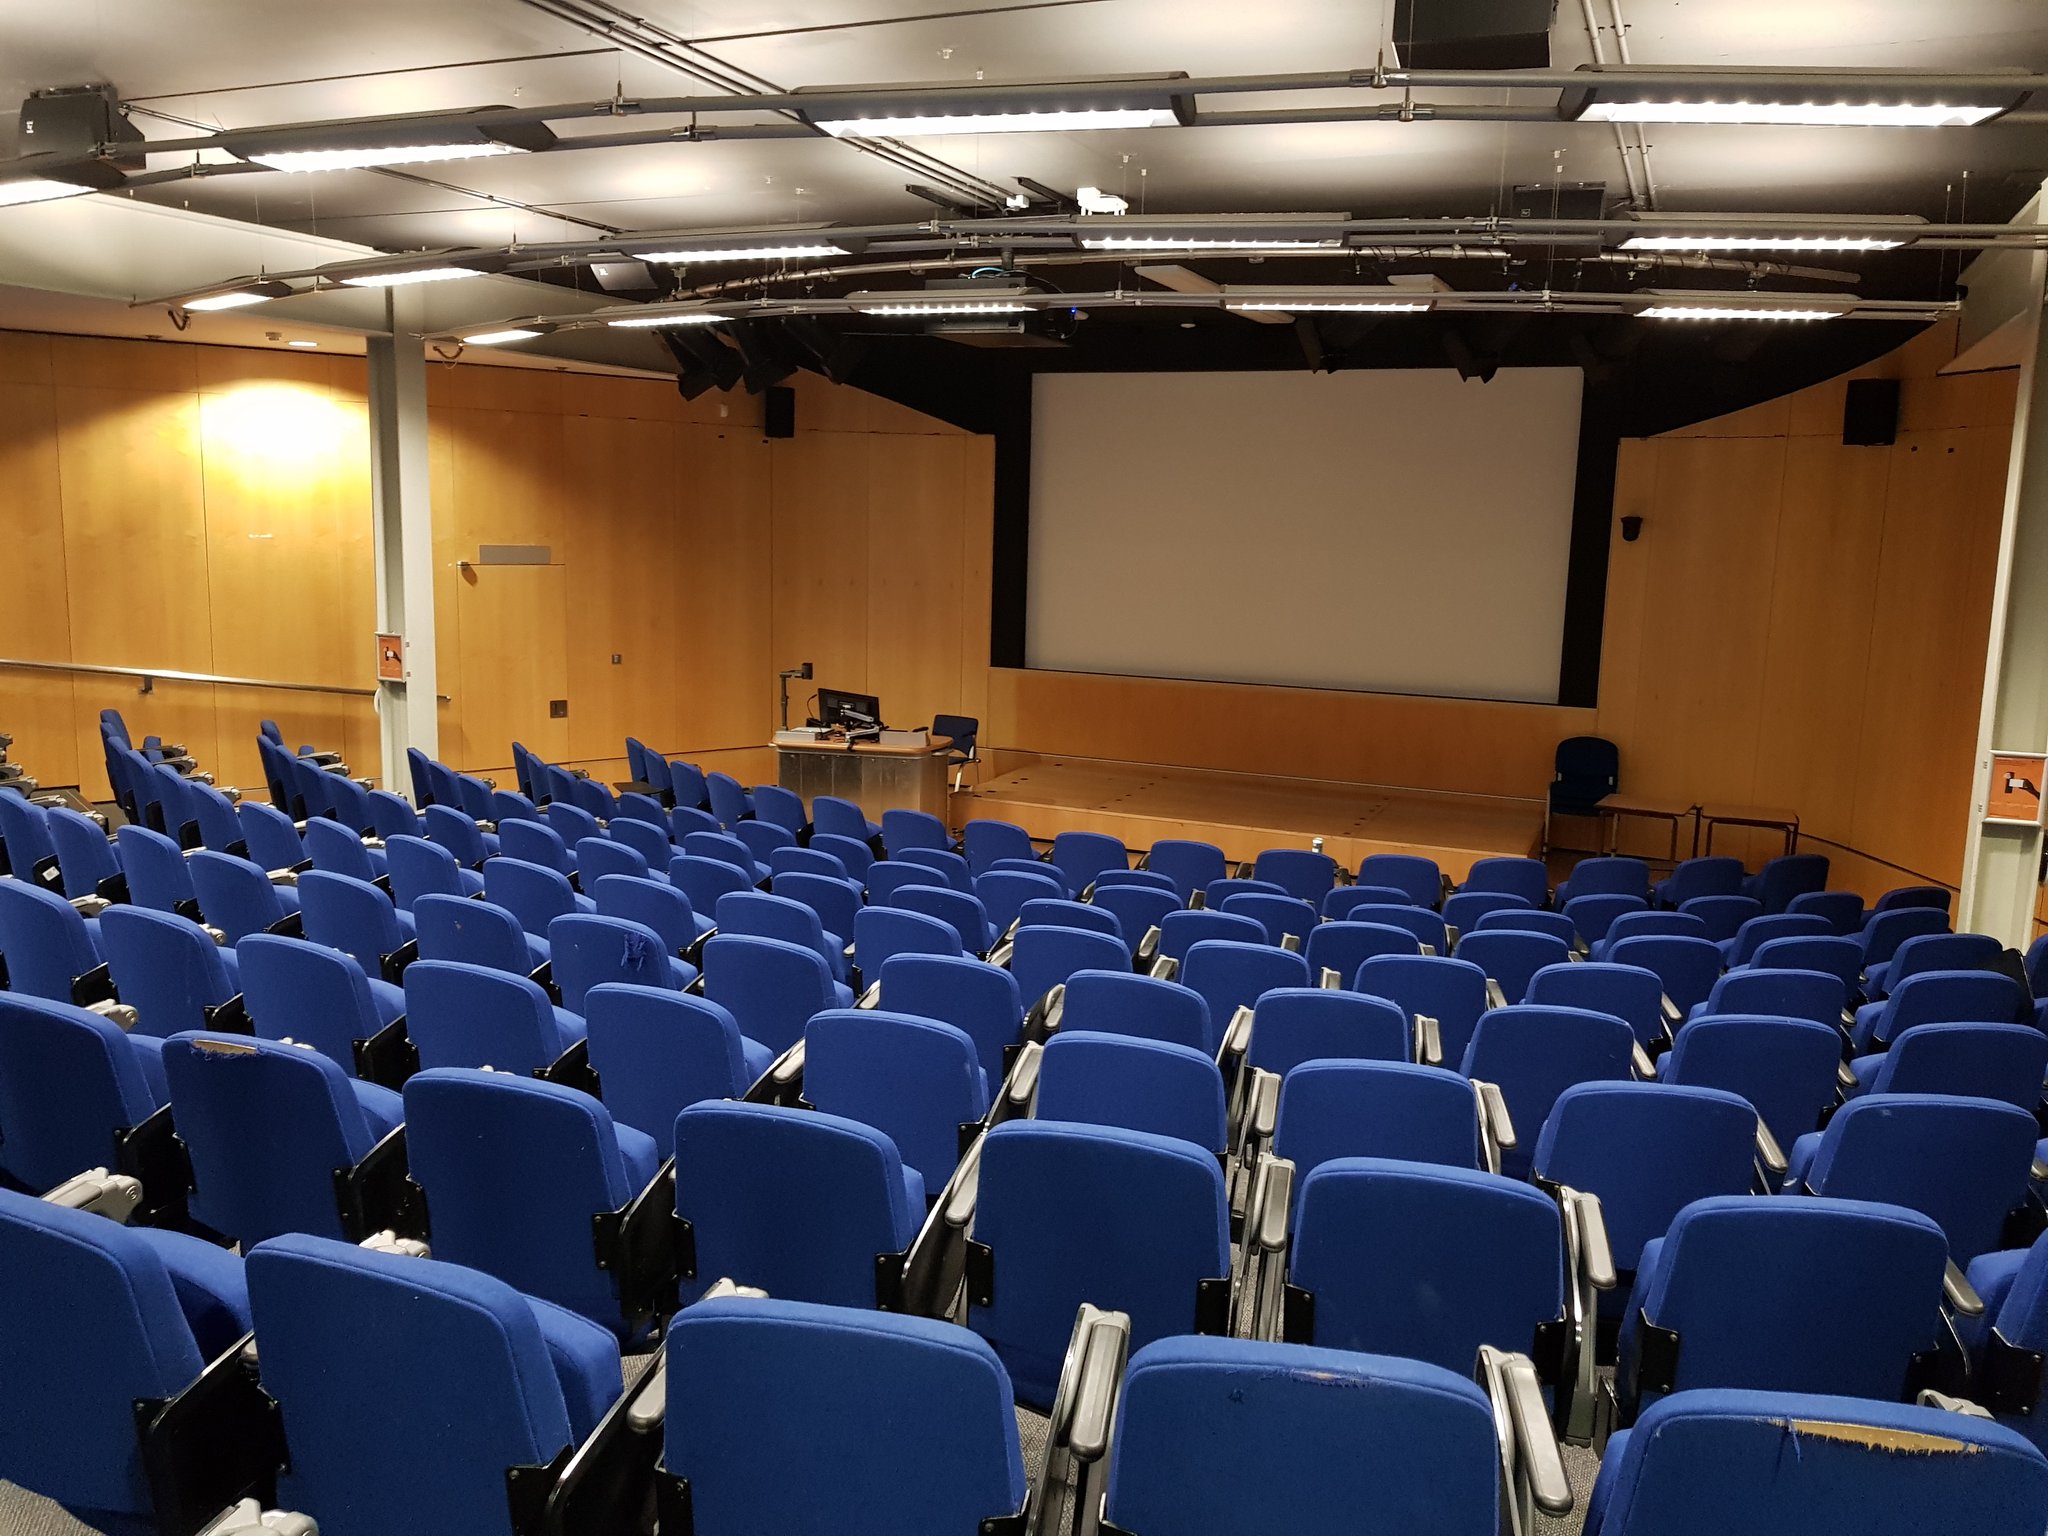 However this is a nice large lecture theatre #SocMedHE17 #minitwalk - not much of a consolation really. Our students work from the cafe or home. https://t.co/j5QaUO1RF6